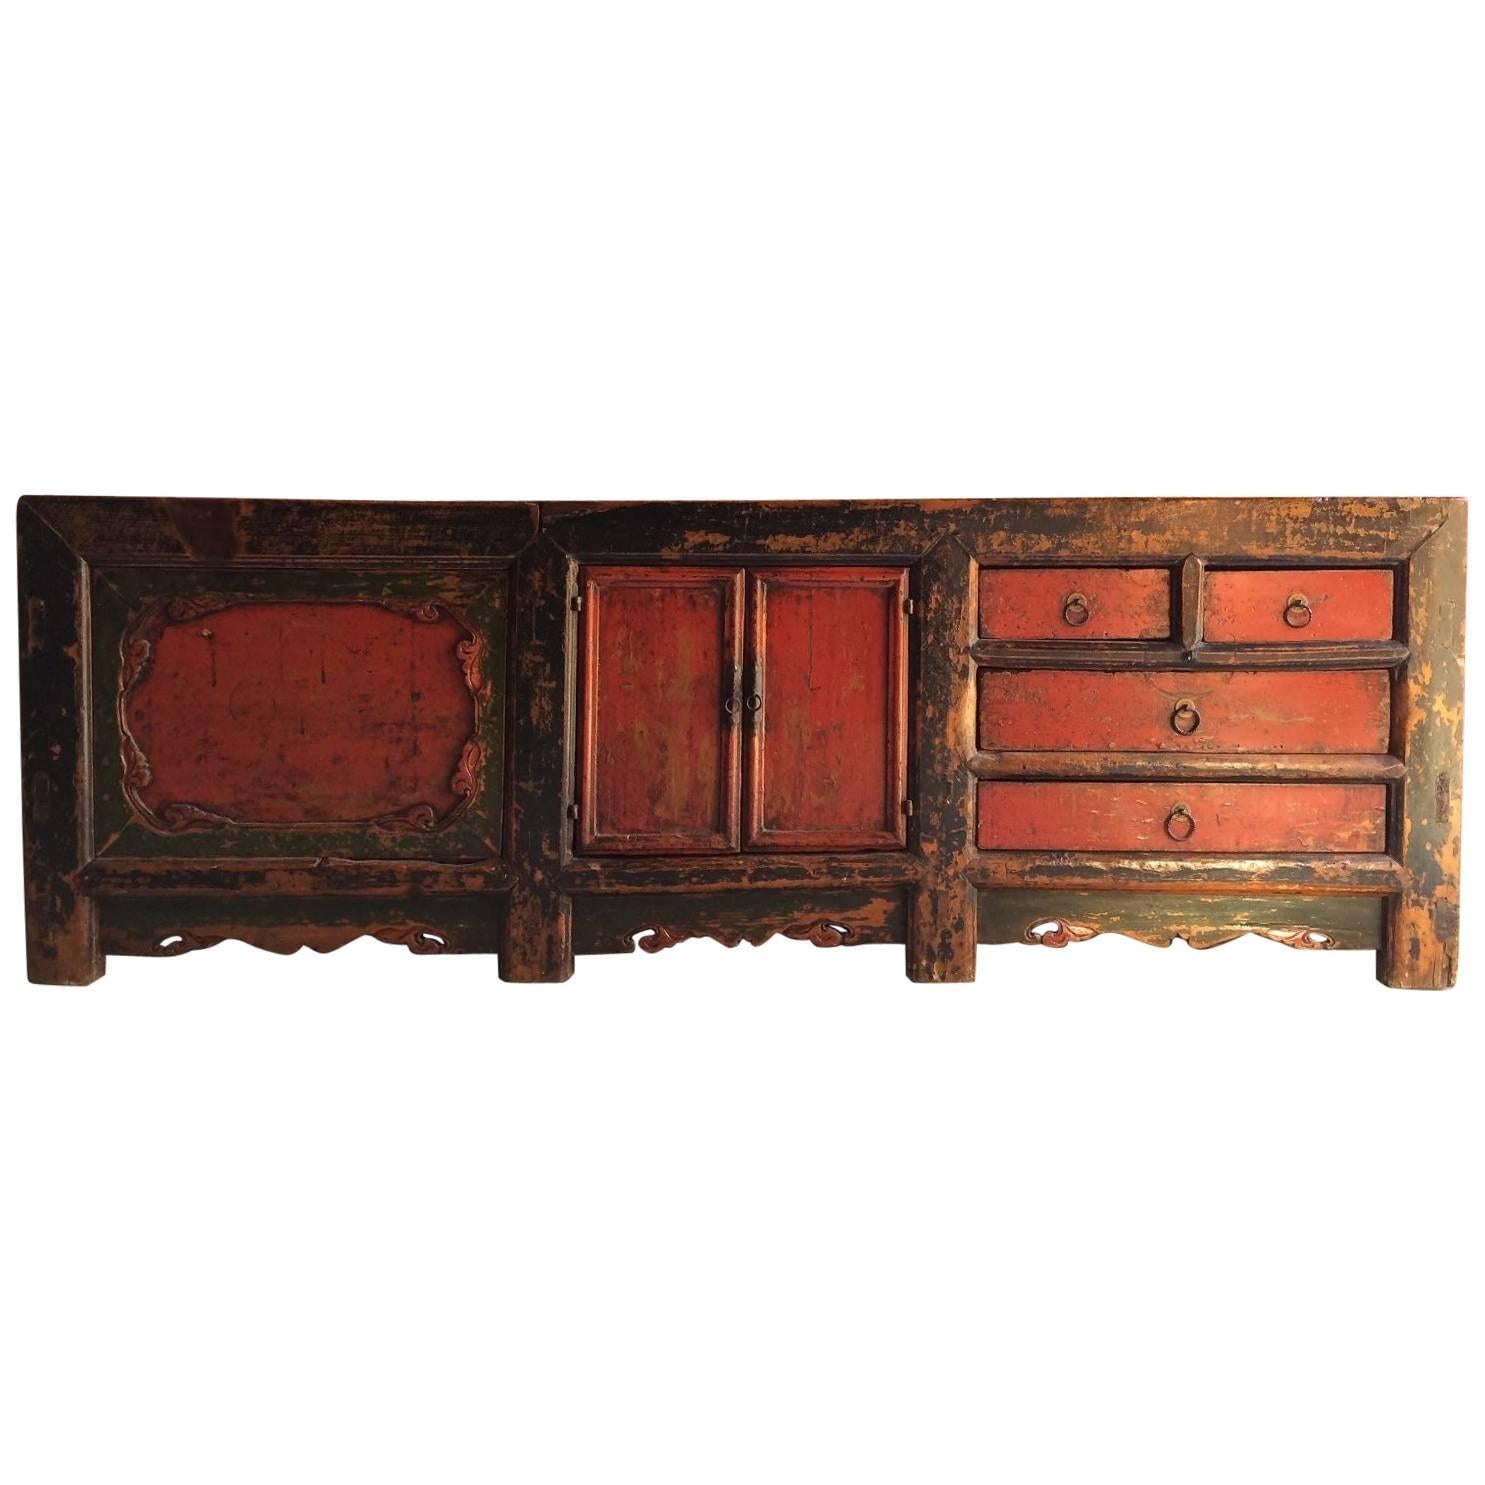 Antique Chinese Sideboard Credenza Grain Store Kang, 18th Century